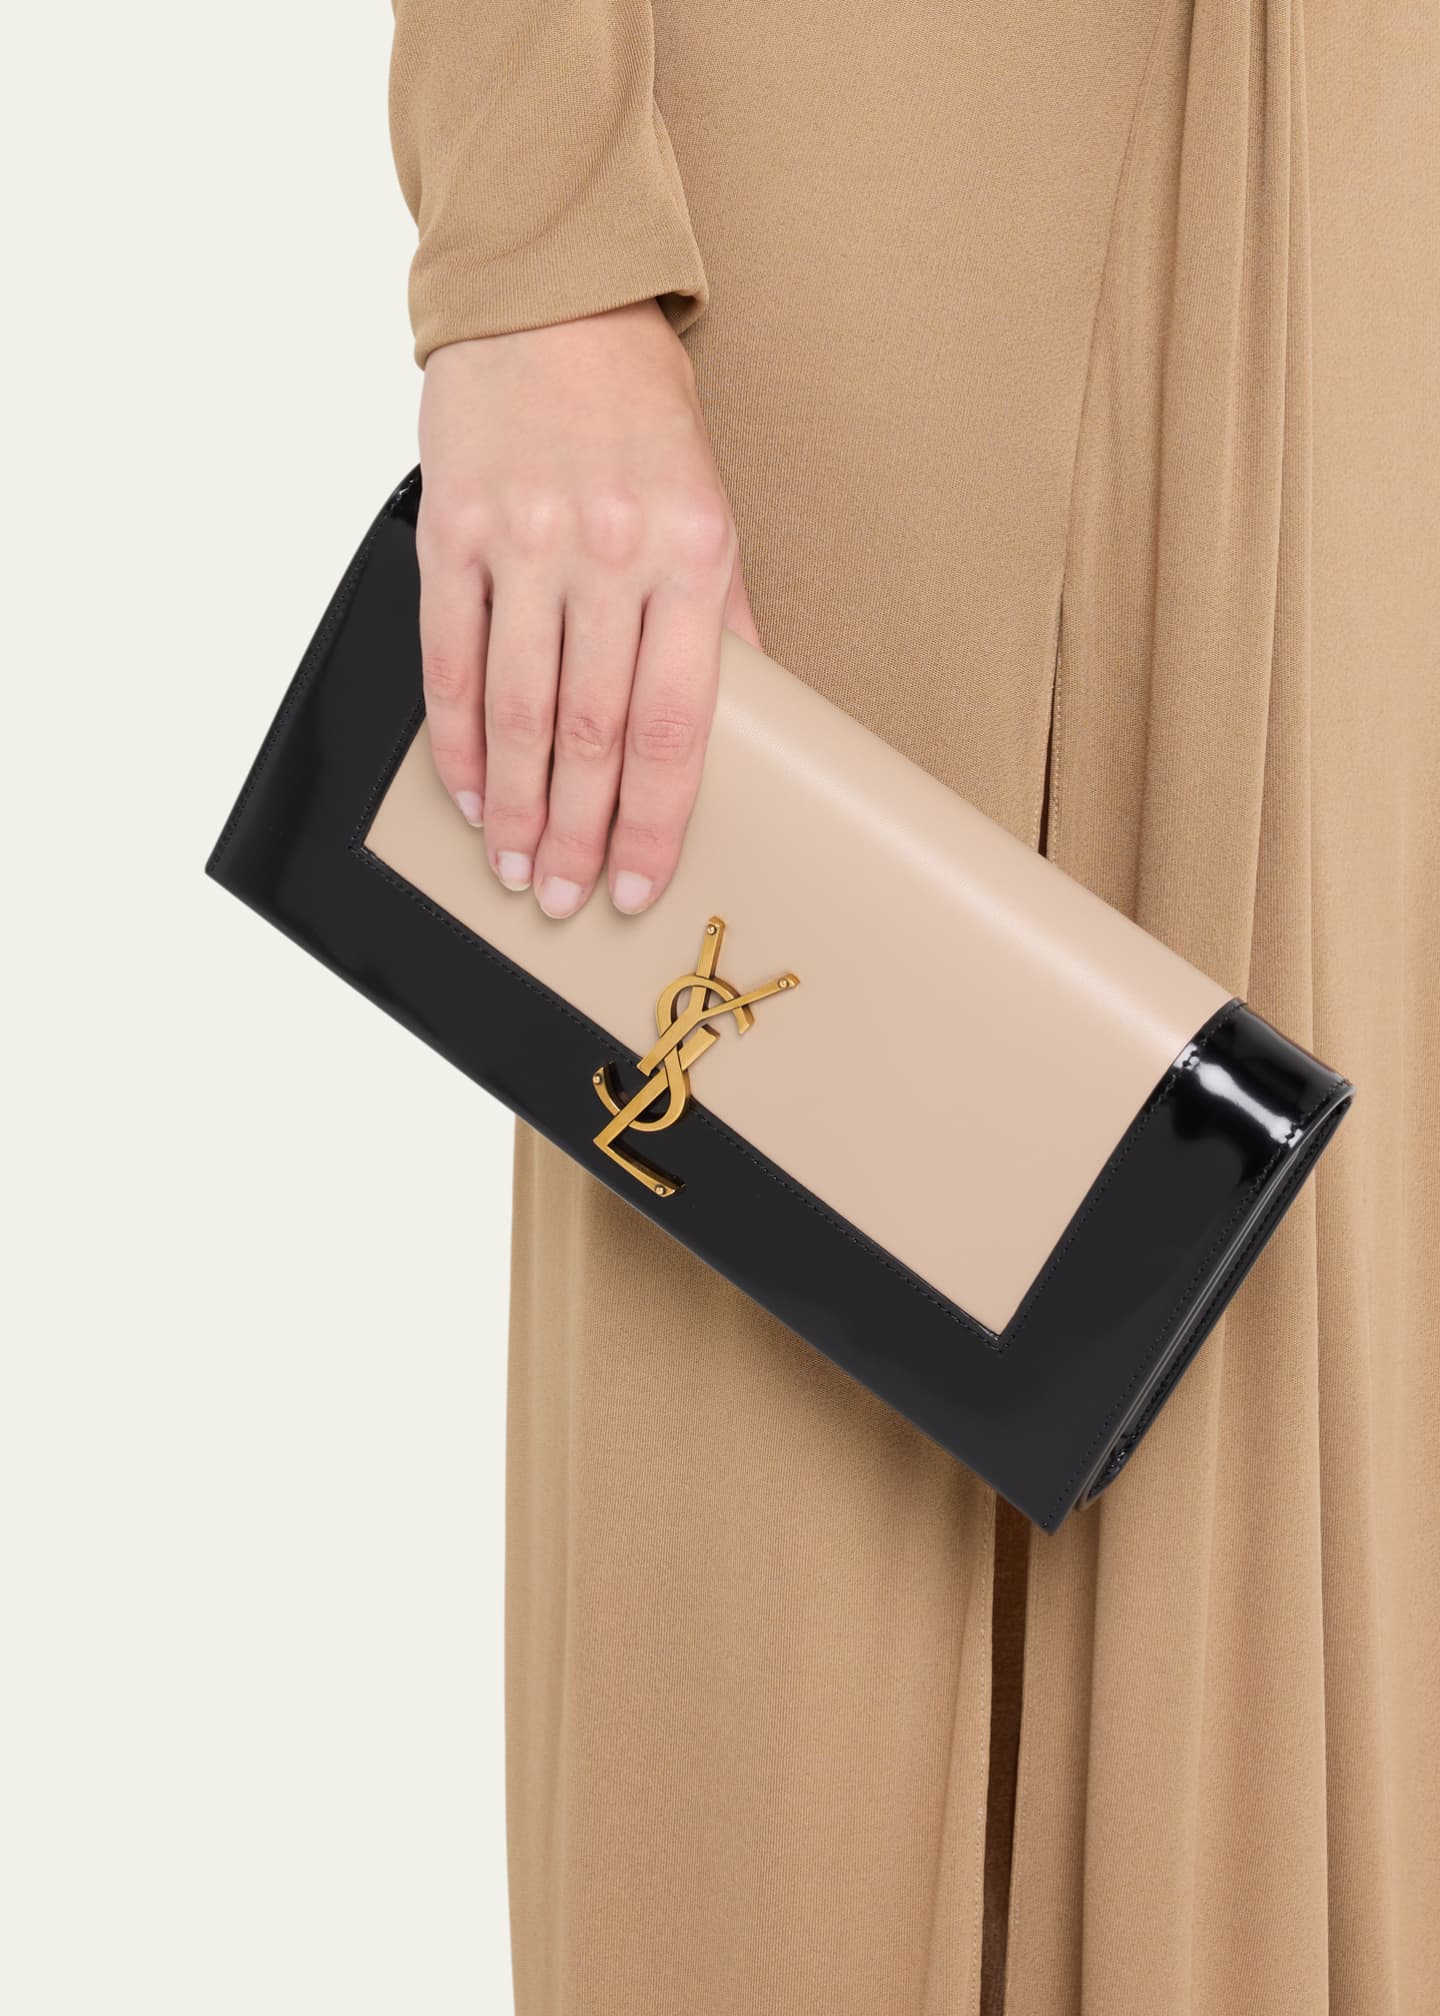 Saint Laurent Kate YSL Clutch Bag in Spazzolato Leather